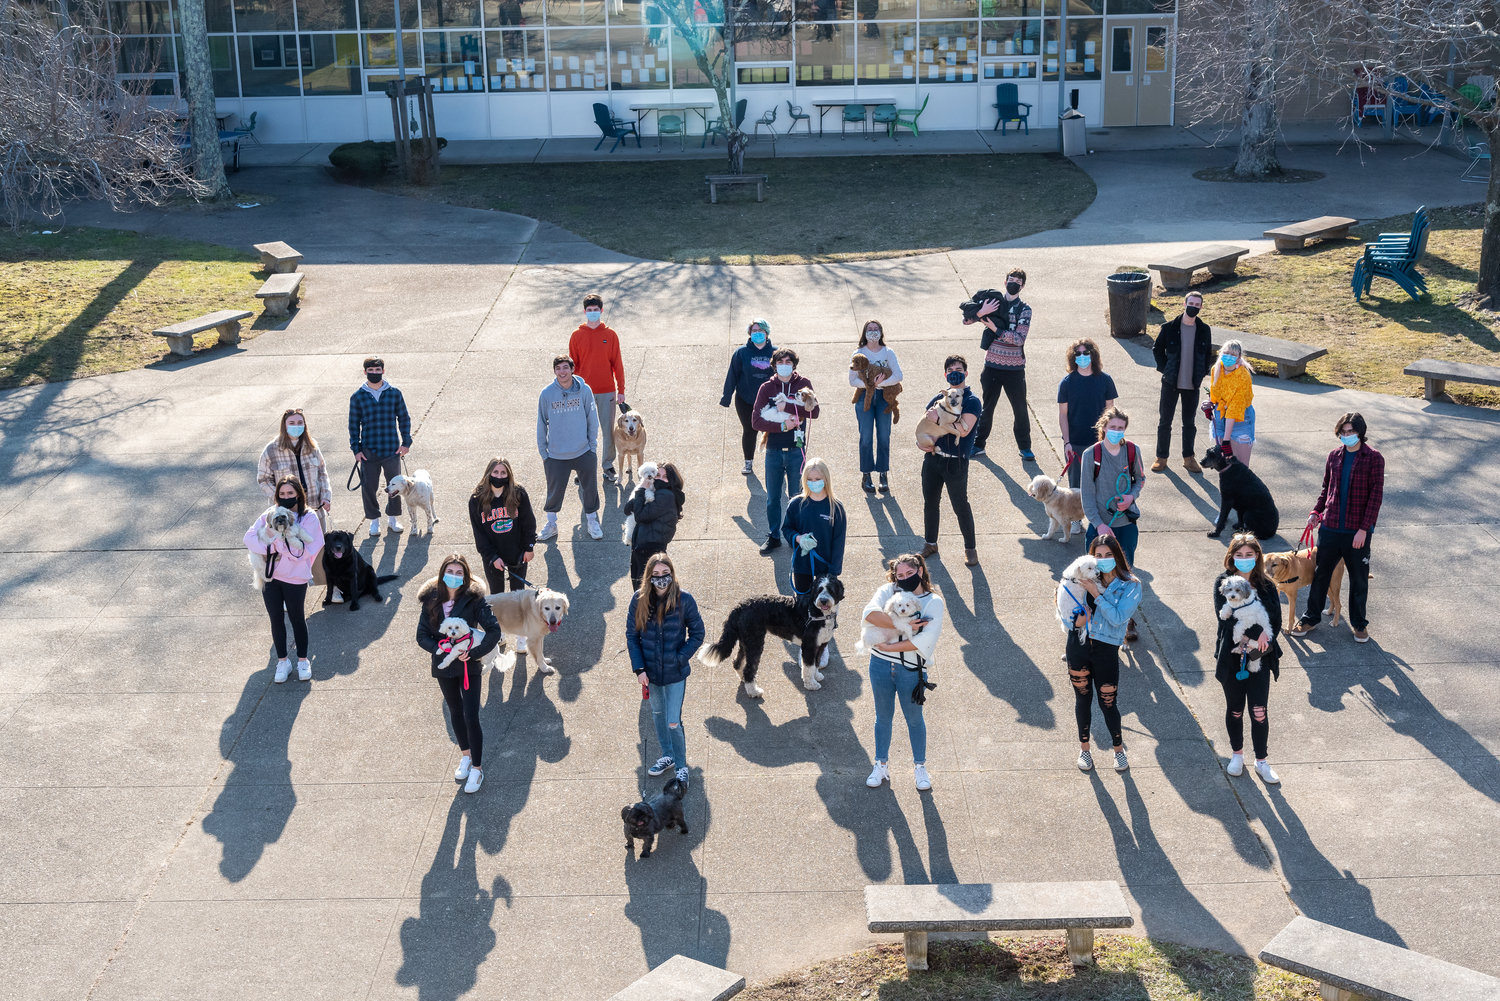 Senior Dog Day, on March 11, showed that North Shore High School seniors can enjoy events with their peers while still adhering to Covid-19 safety guidelines.